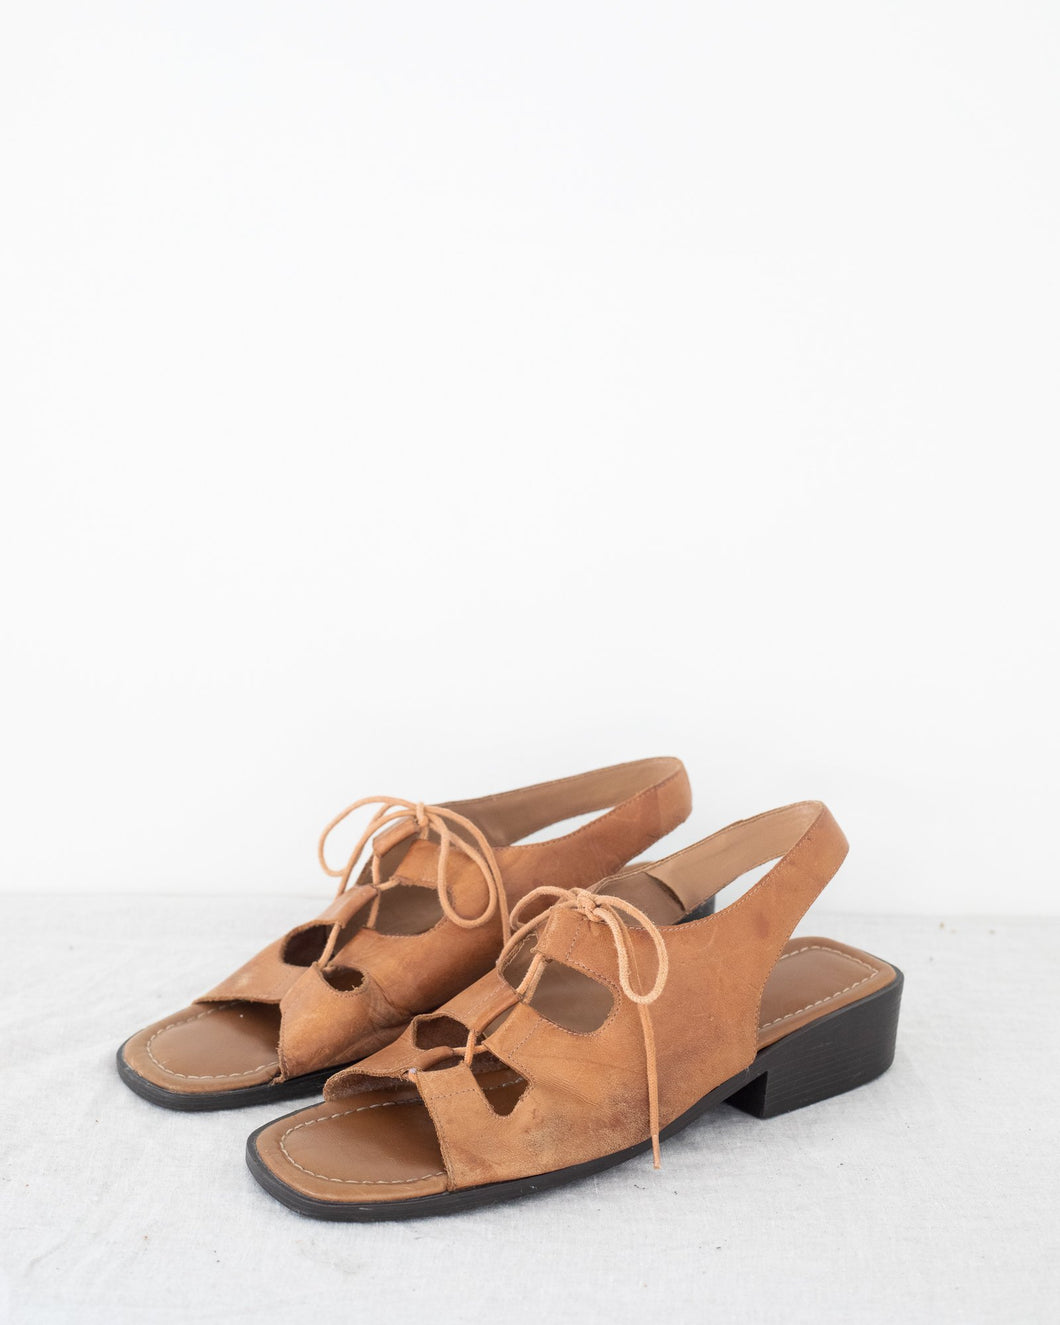 Brown Lace Up Sandals